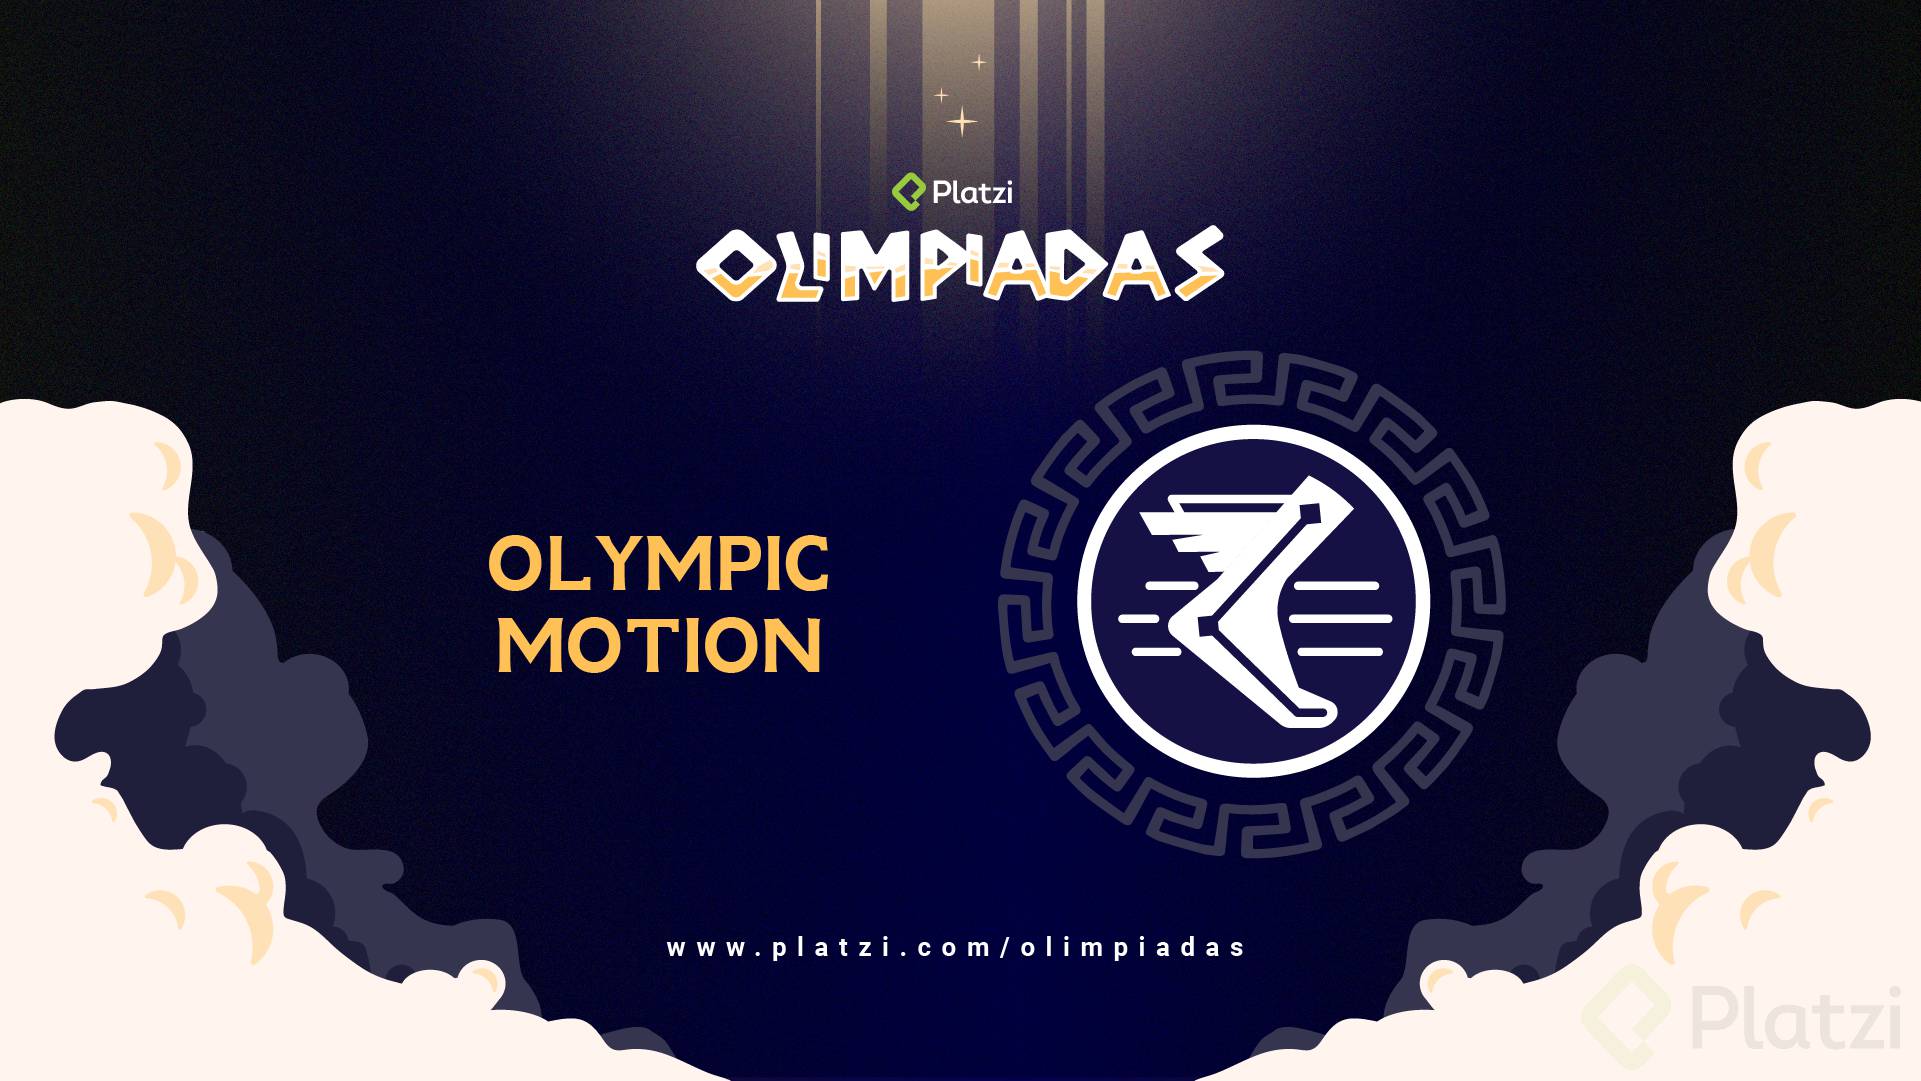 Olimpiadas_Olympic_Motion_Wallpaper.png